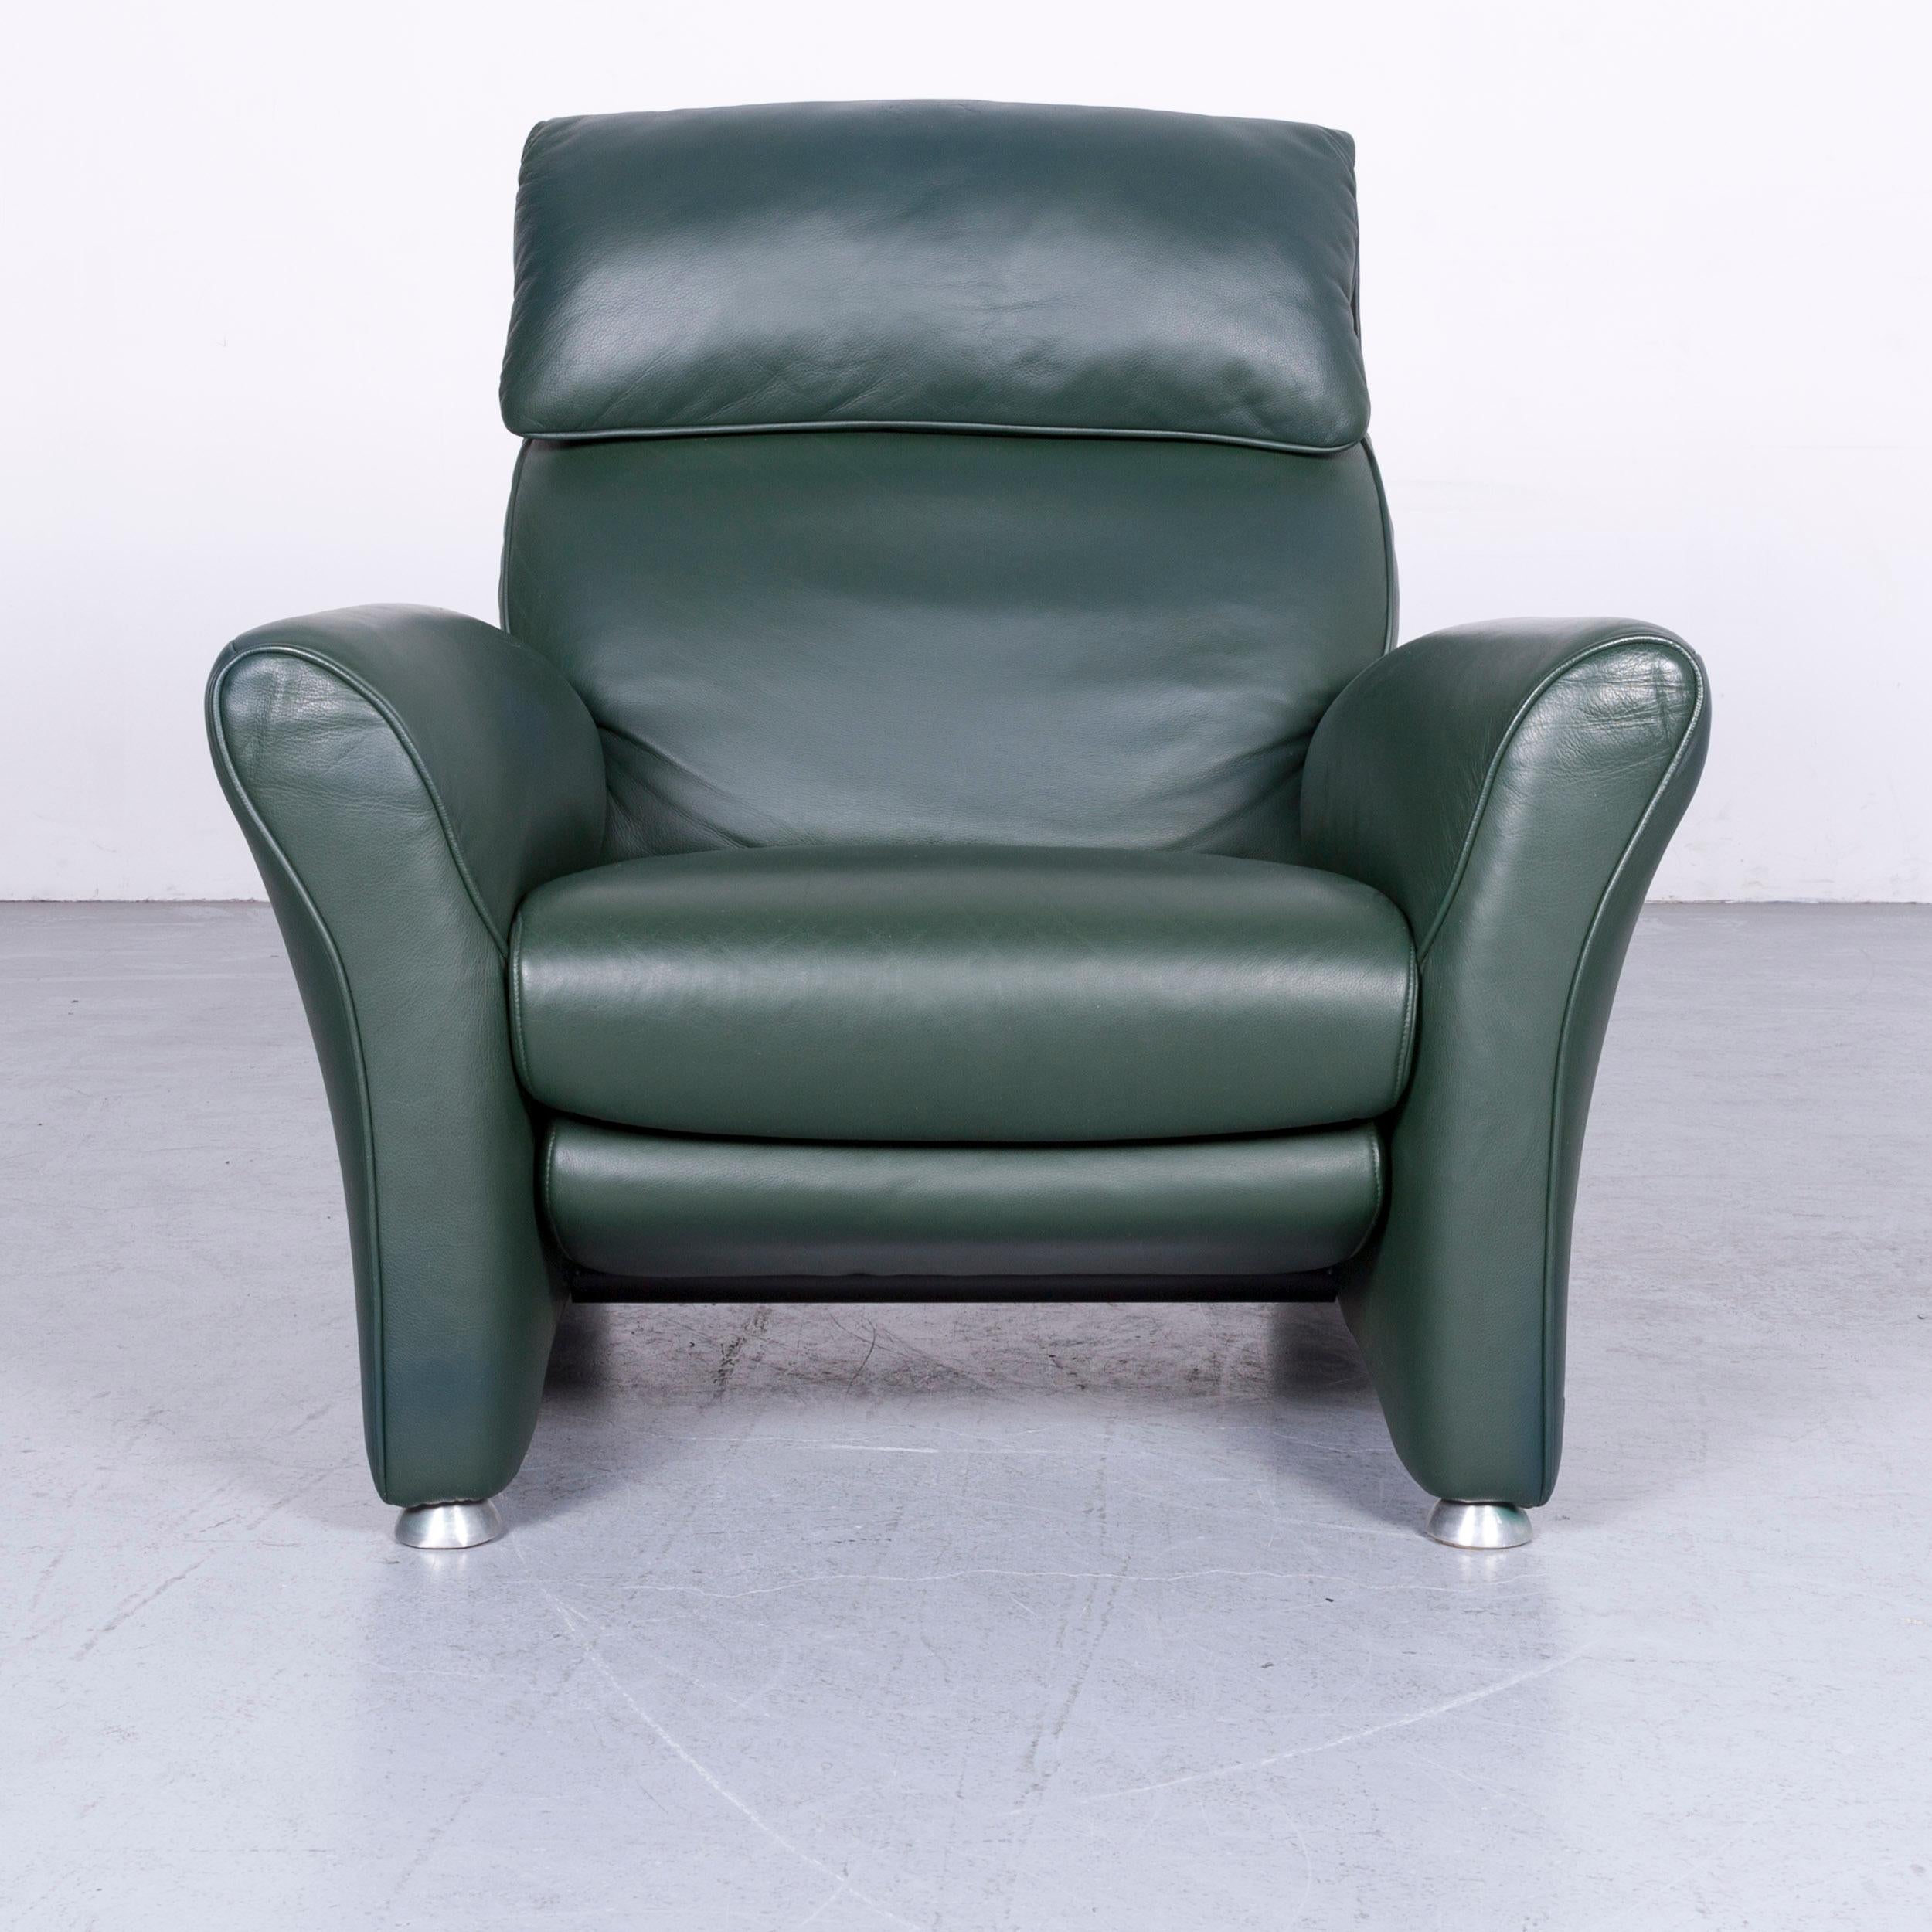 German Musterring Designer Leather Armchair Green One-Seat Chair